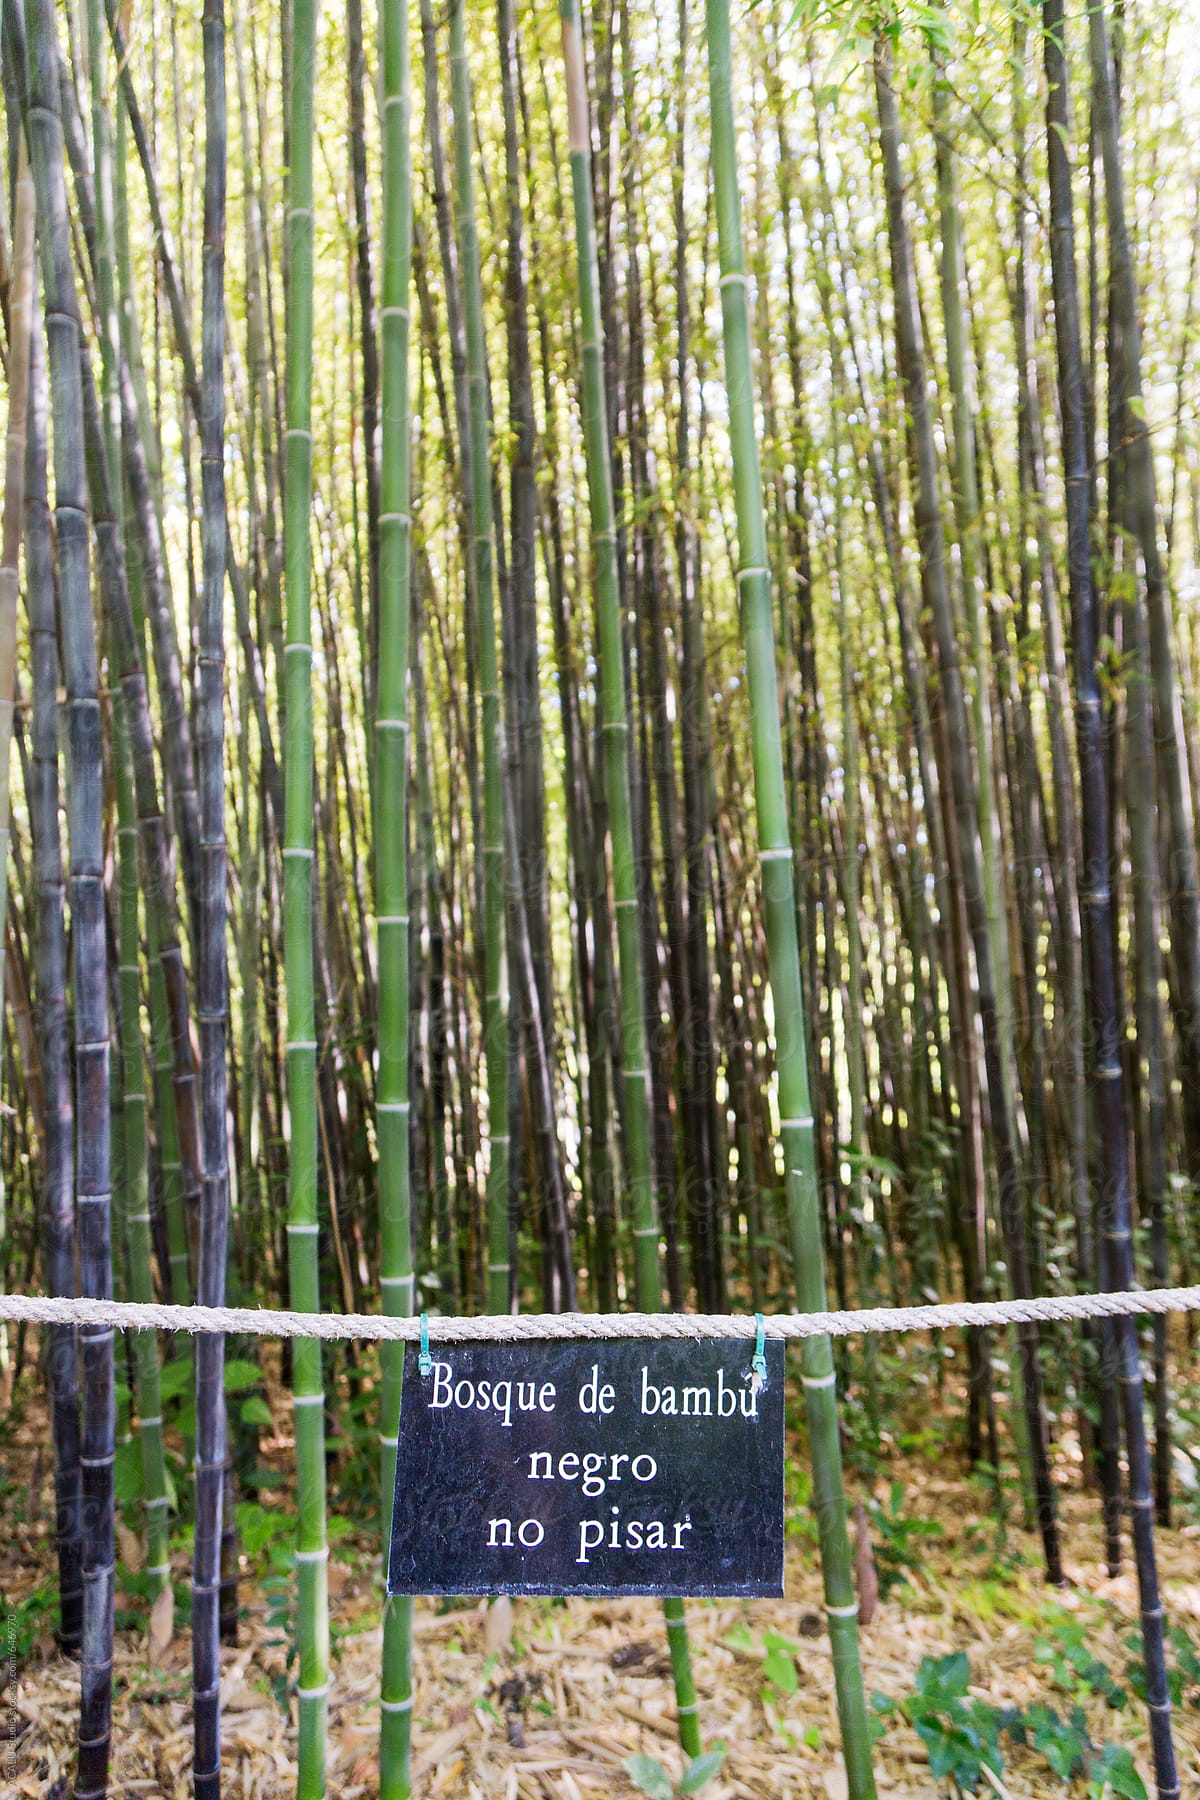 Black bamboo forest not to step